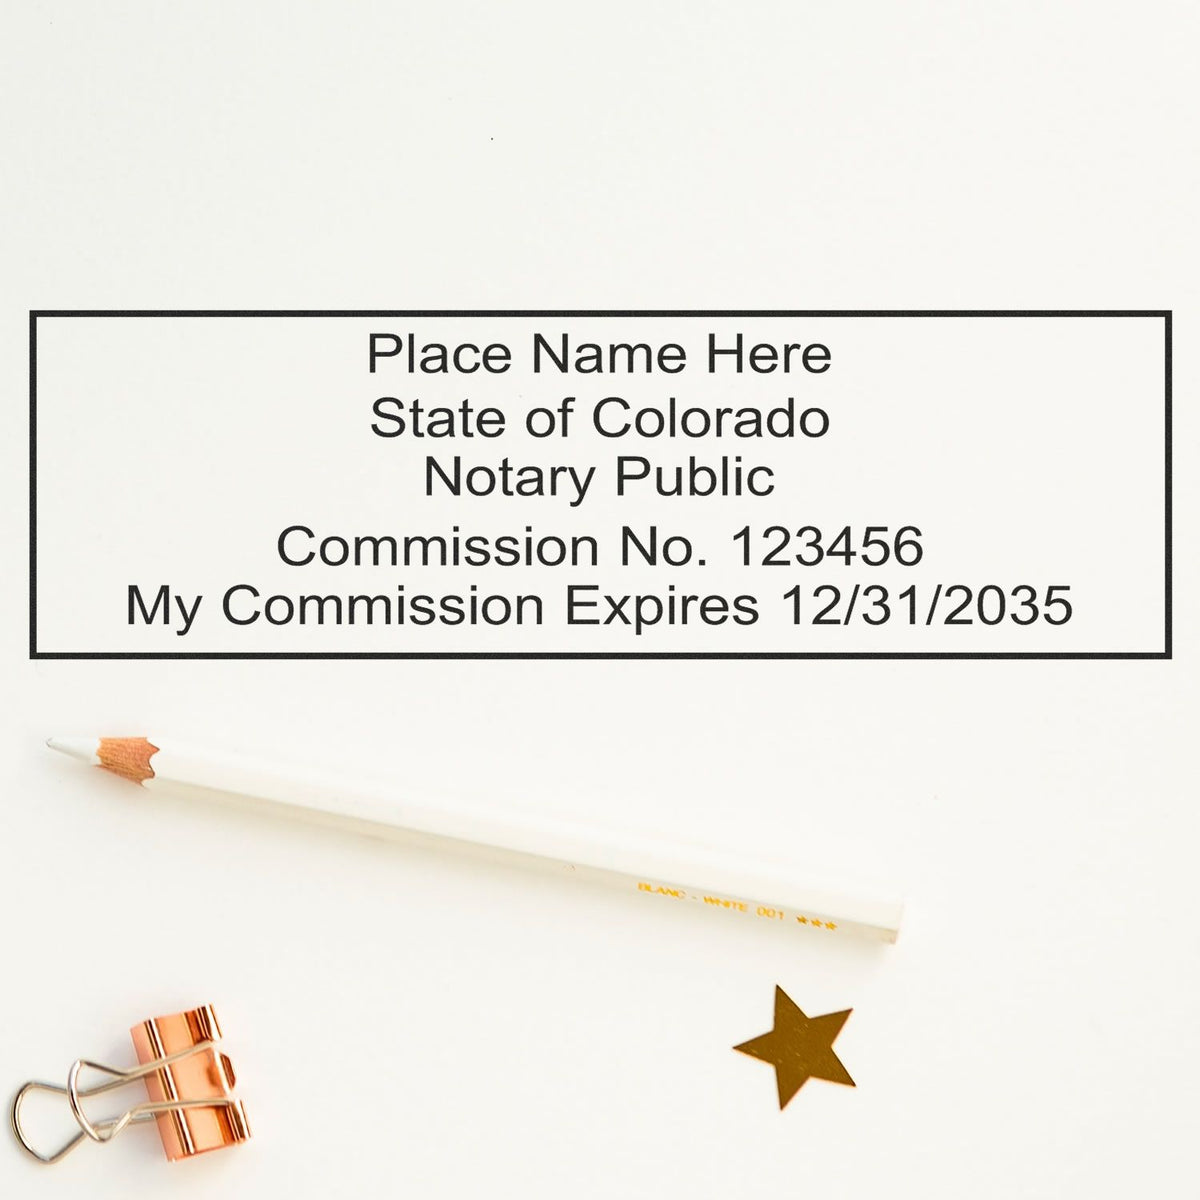 A stamped impression of the Slim Pre-Inked Rectangular Notary Stamp for Colorado in this stylish lifestyle photo, setting the tone for a unique and personalized product.